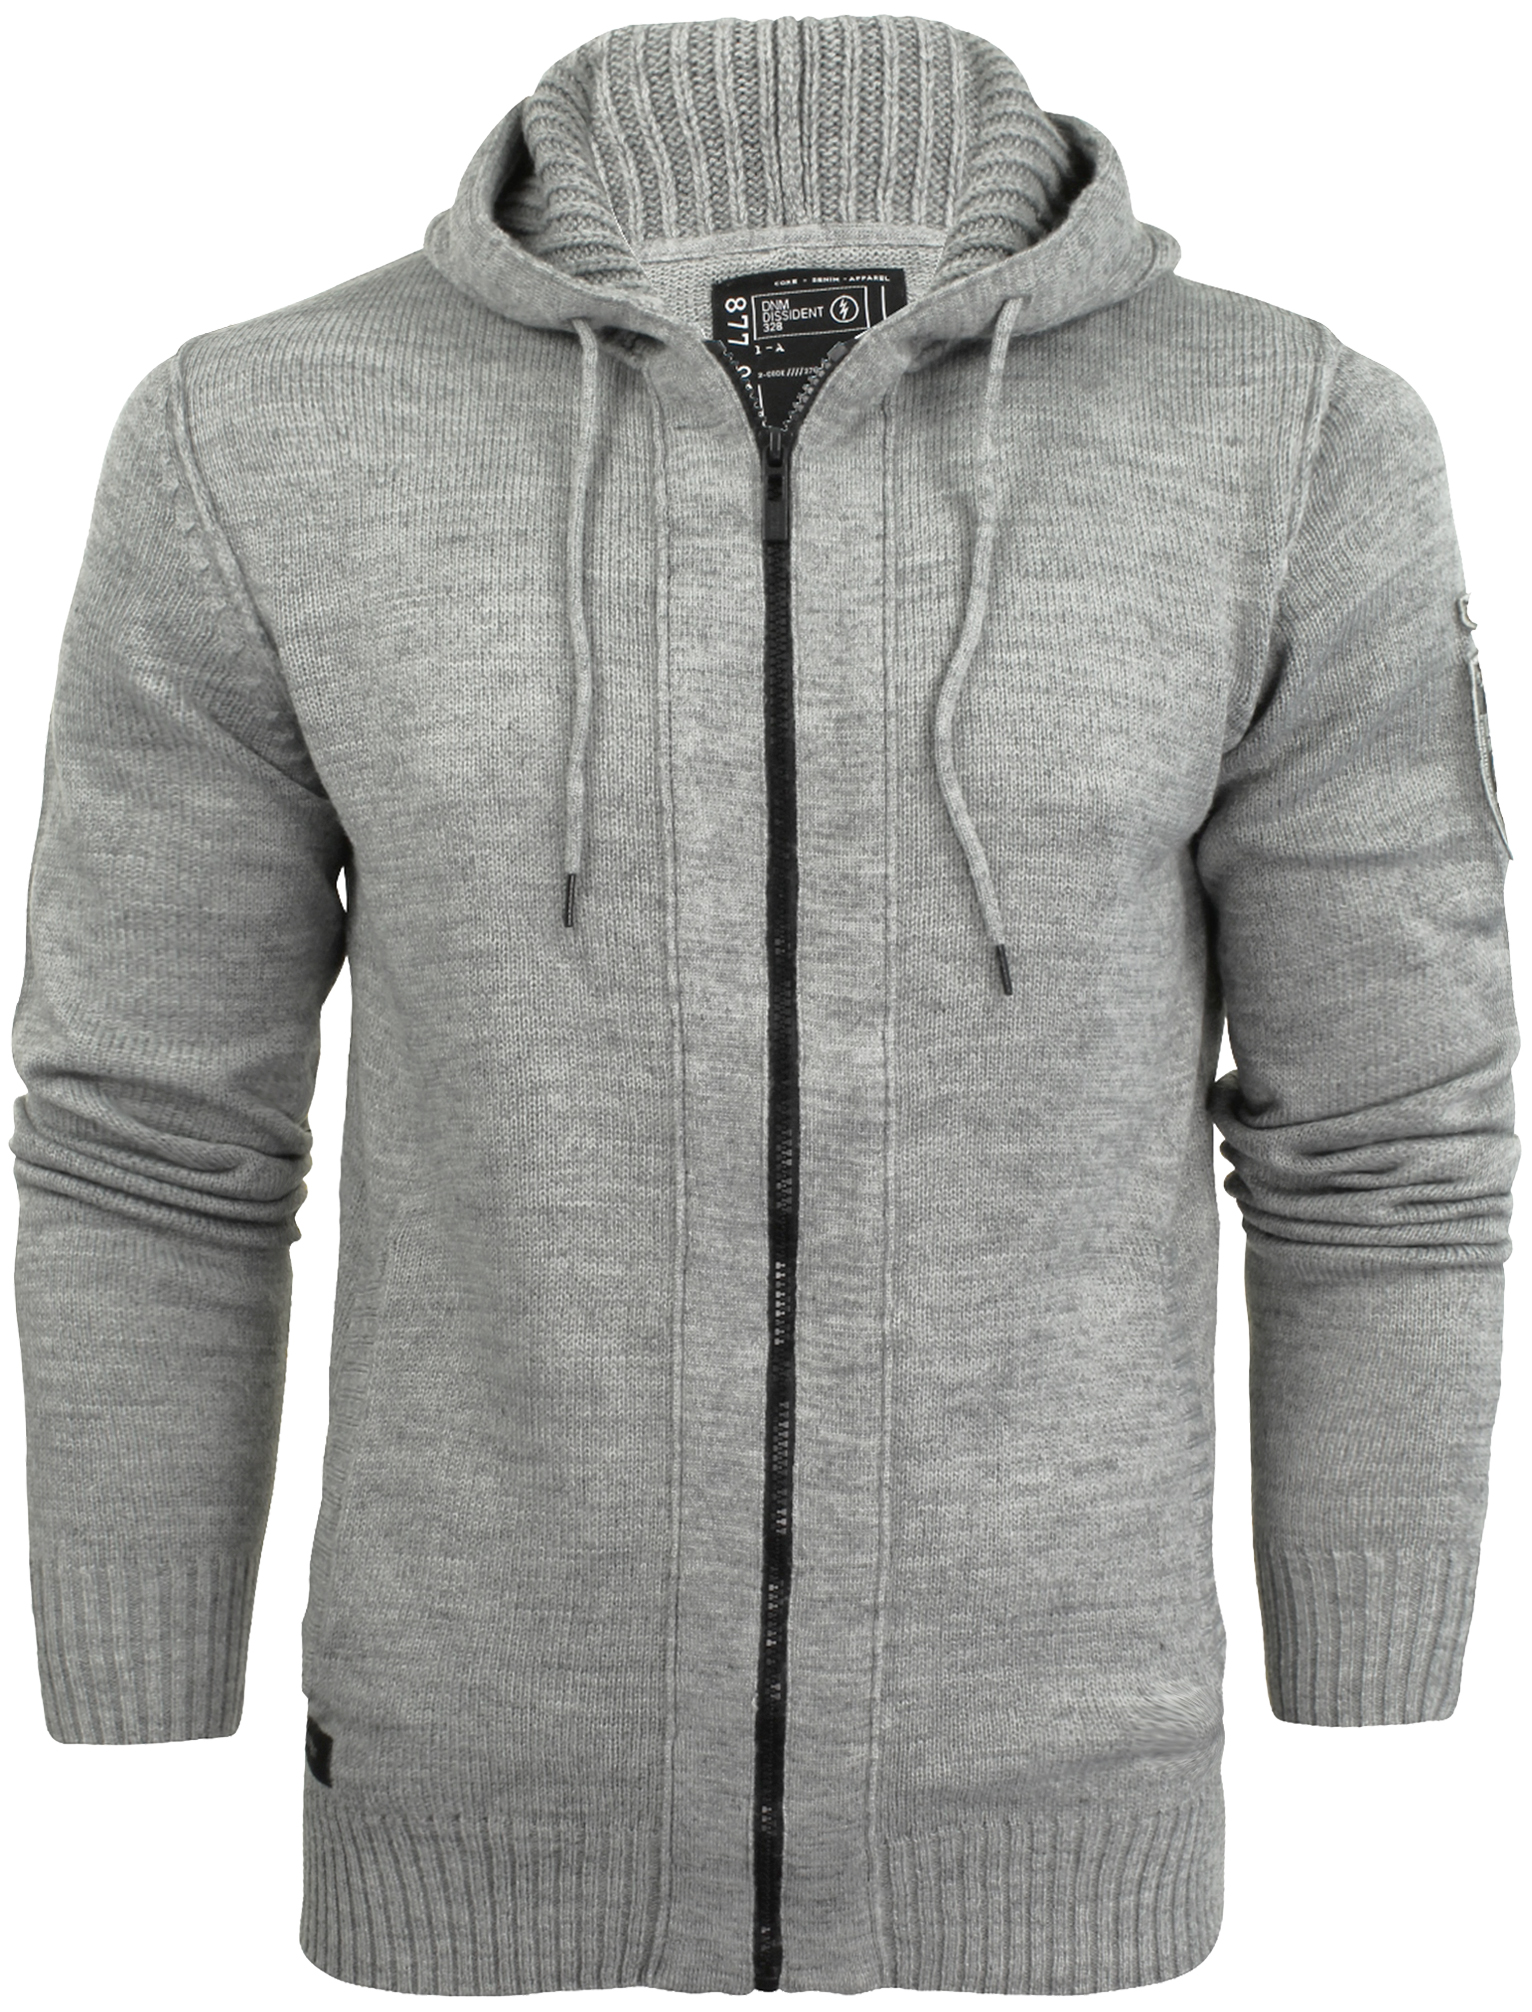 Mens Dissident Cruise Zip Up Hooded Sweater Hoodie Knitted Cardigan ...